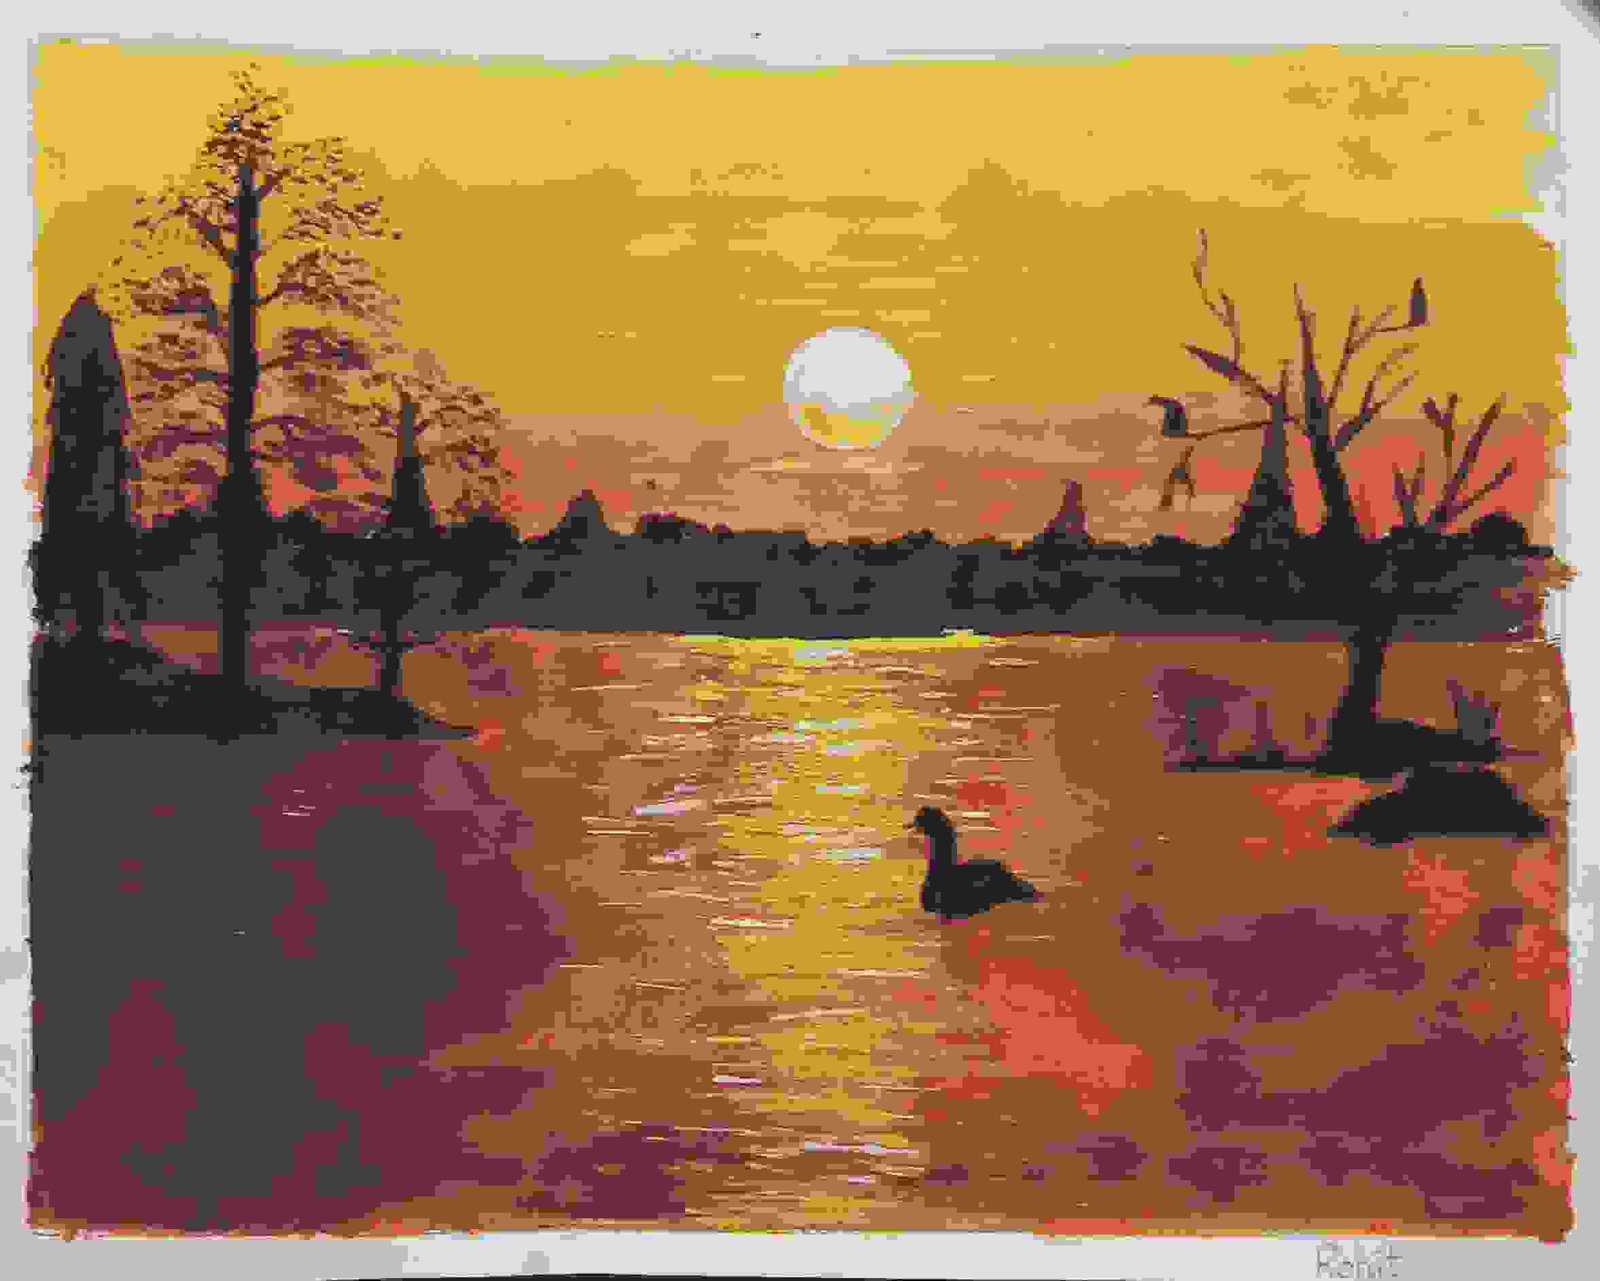 Painting Of Evening Scenery Painting In Simple - GranNino